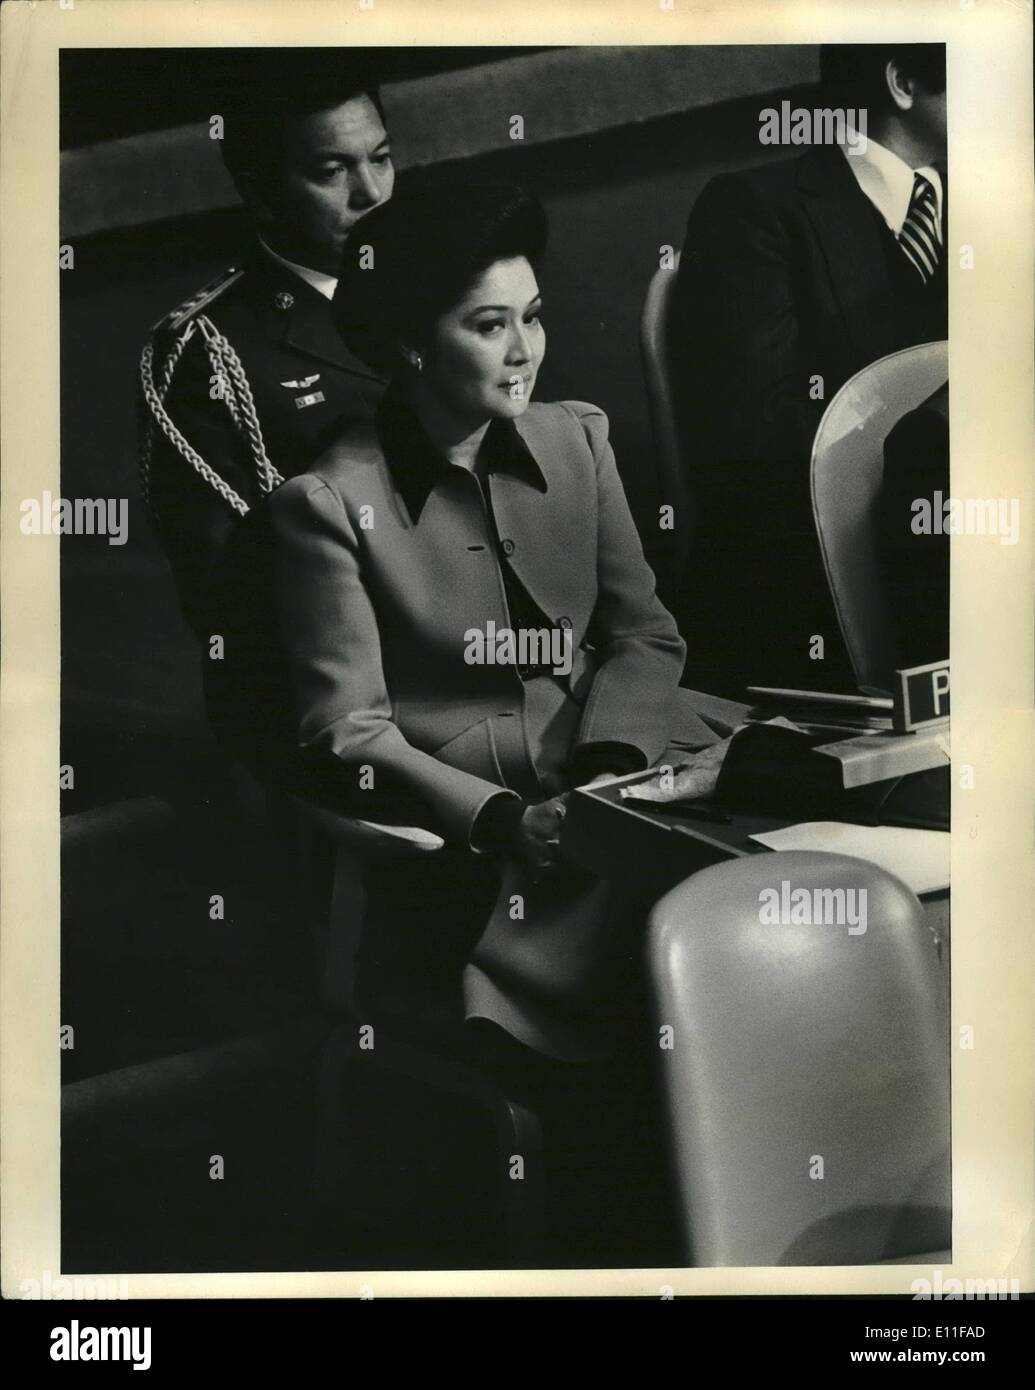 Oct. 10, 1977 - Imelda Marcos at the UN. Stock Photo